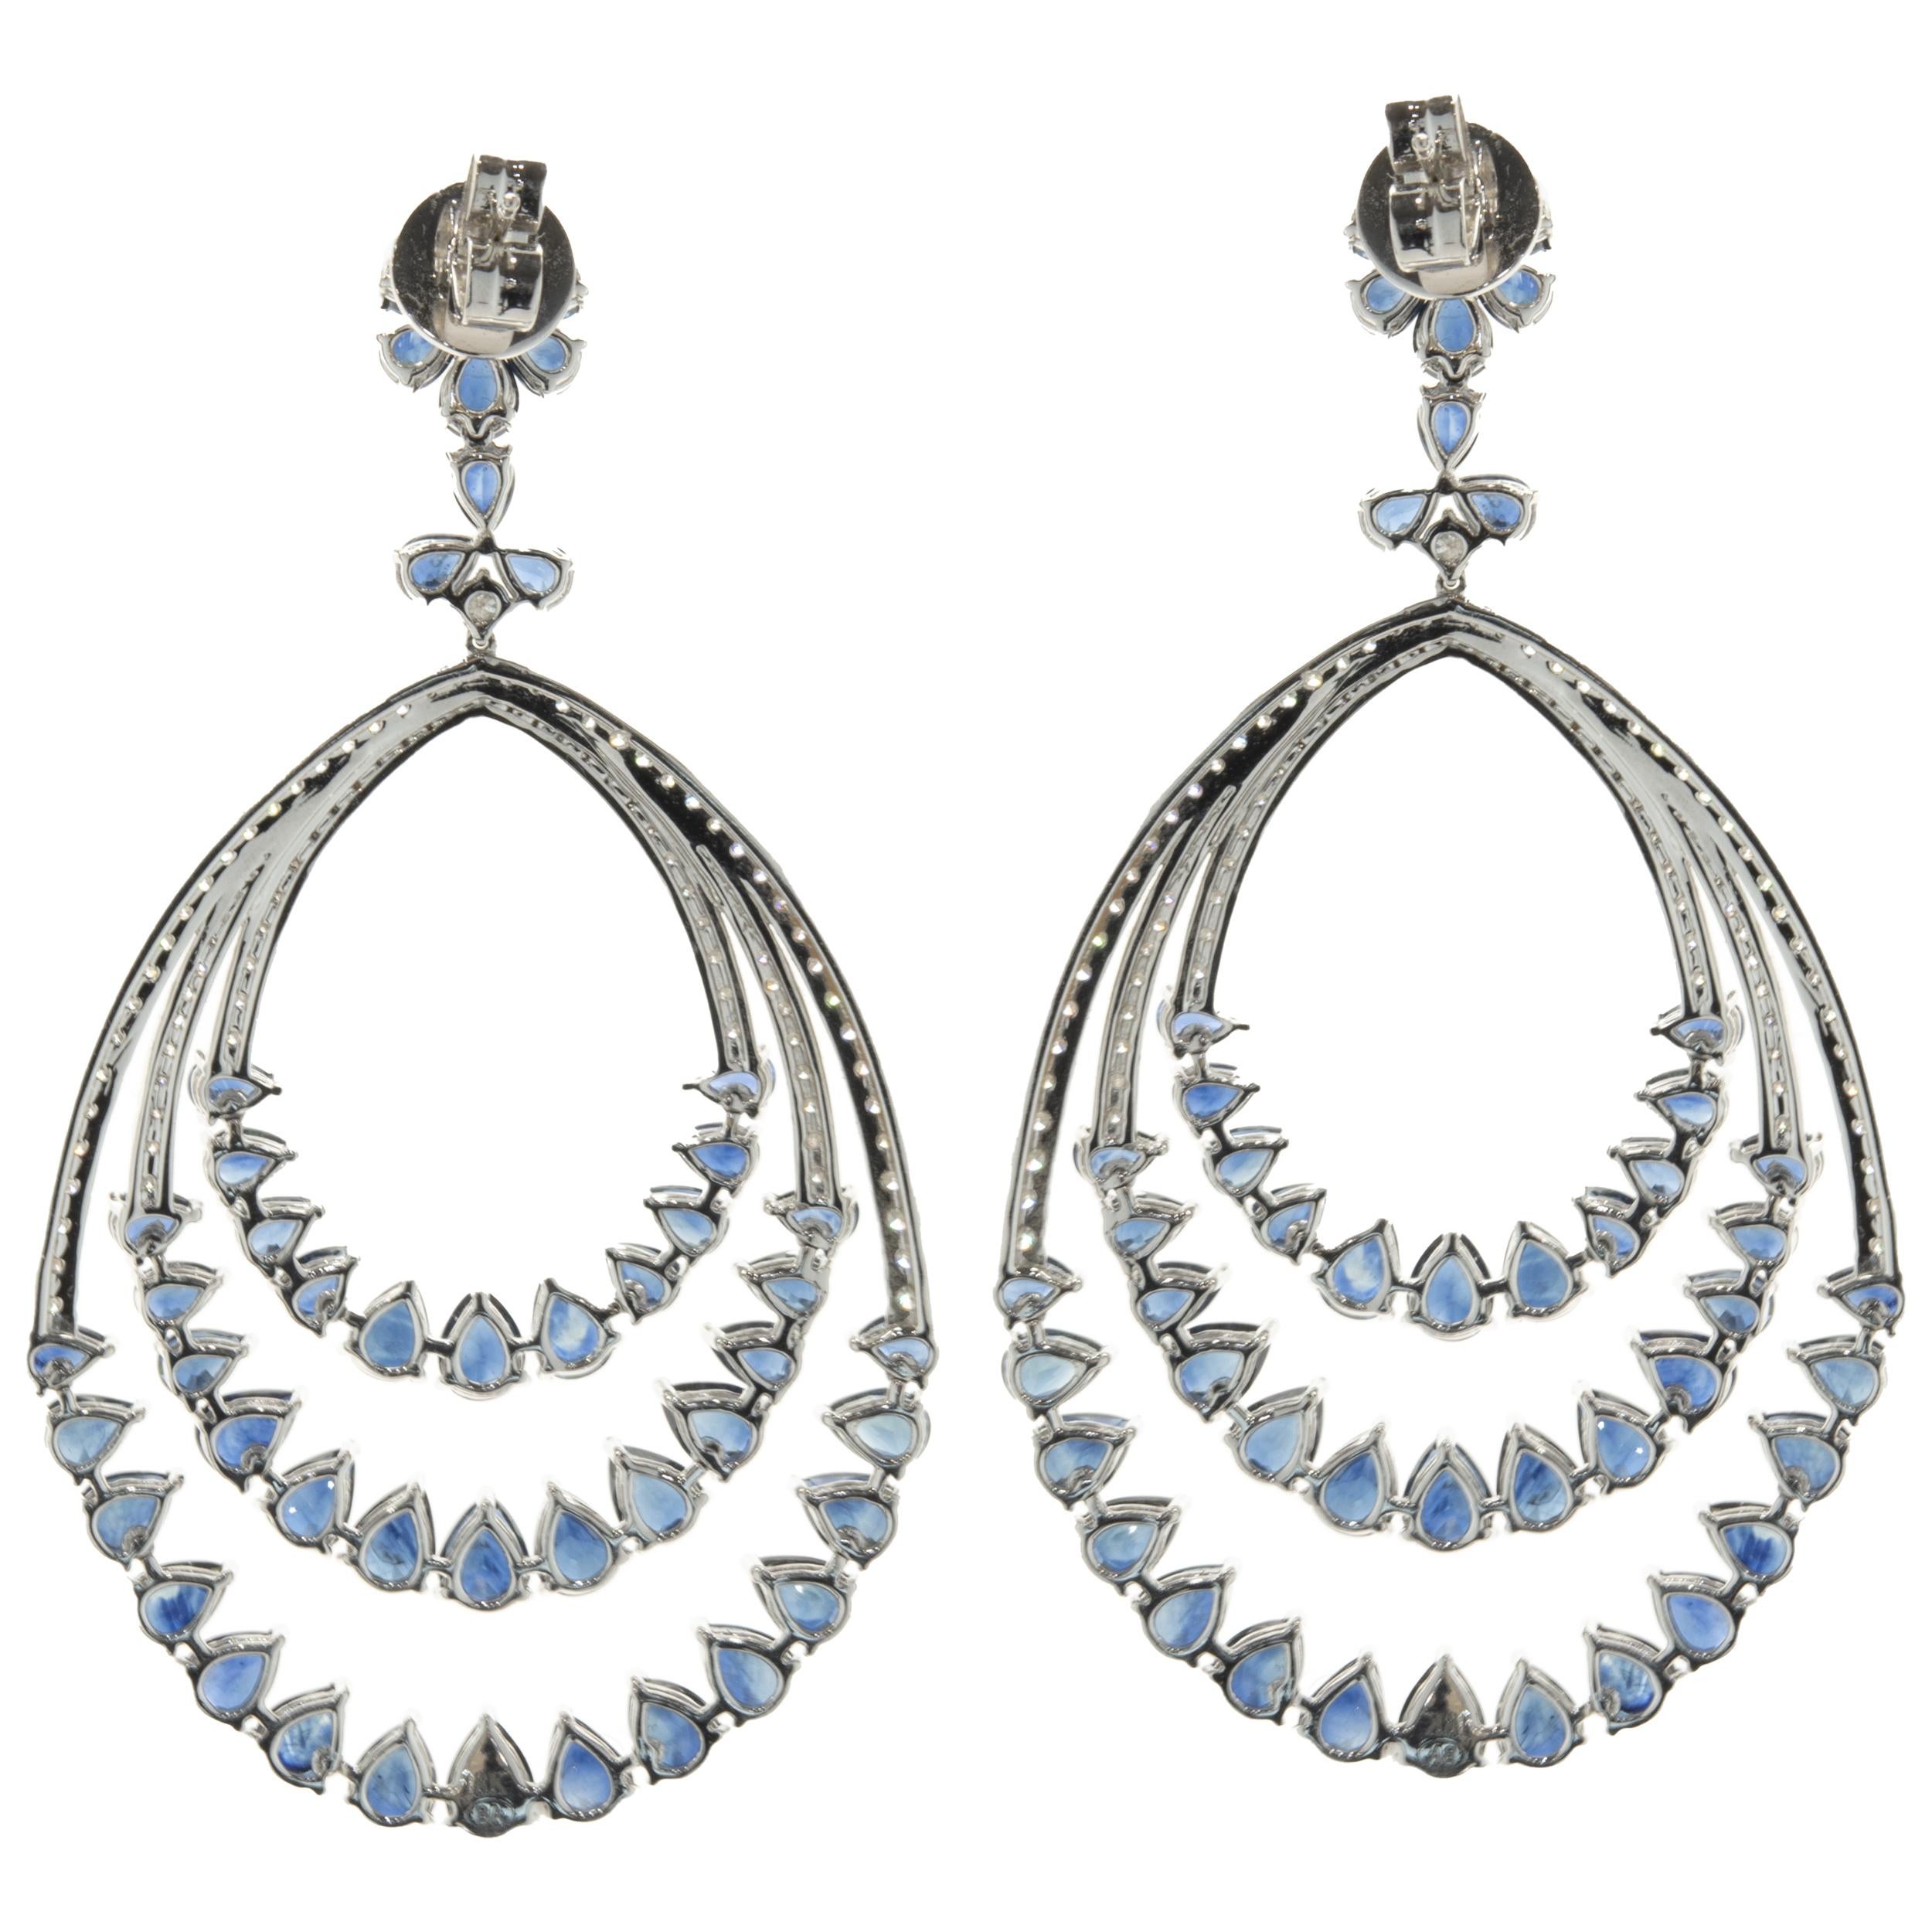 Designer: custom
Material: 18K white gold
Diamonds: round brilliant cut = 2.09cttw
Color: G
Clarity: SI1
Sapphire: 96 pear cut = 26.79cttw
Color: Blue
Clarity: AAA
Dimensions: earrings measure 2.75-inches in length
Fastenings: posts with omega